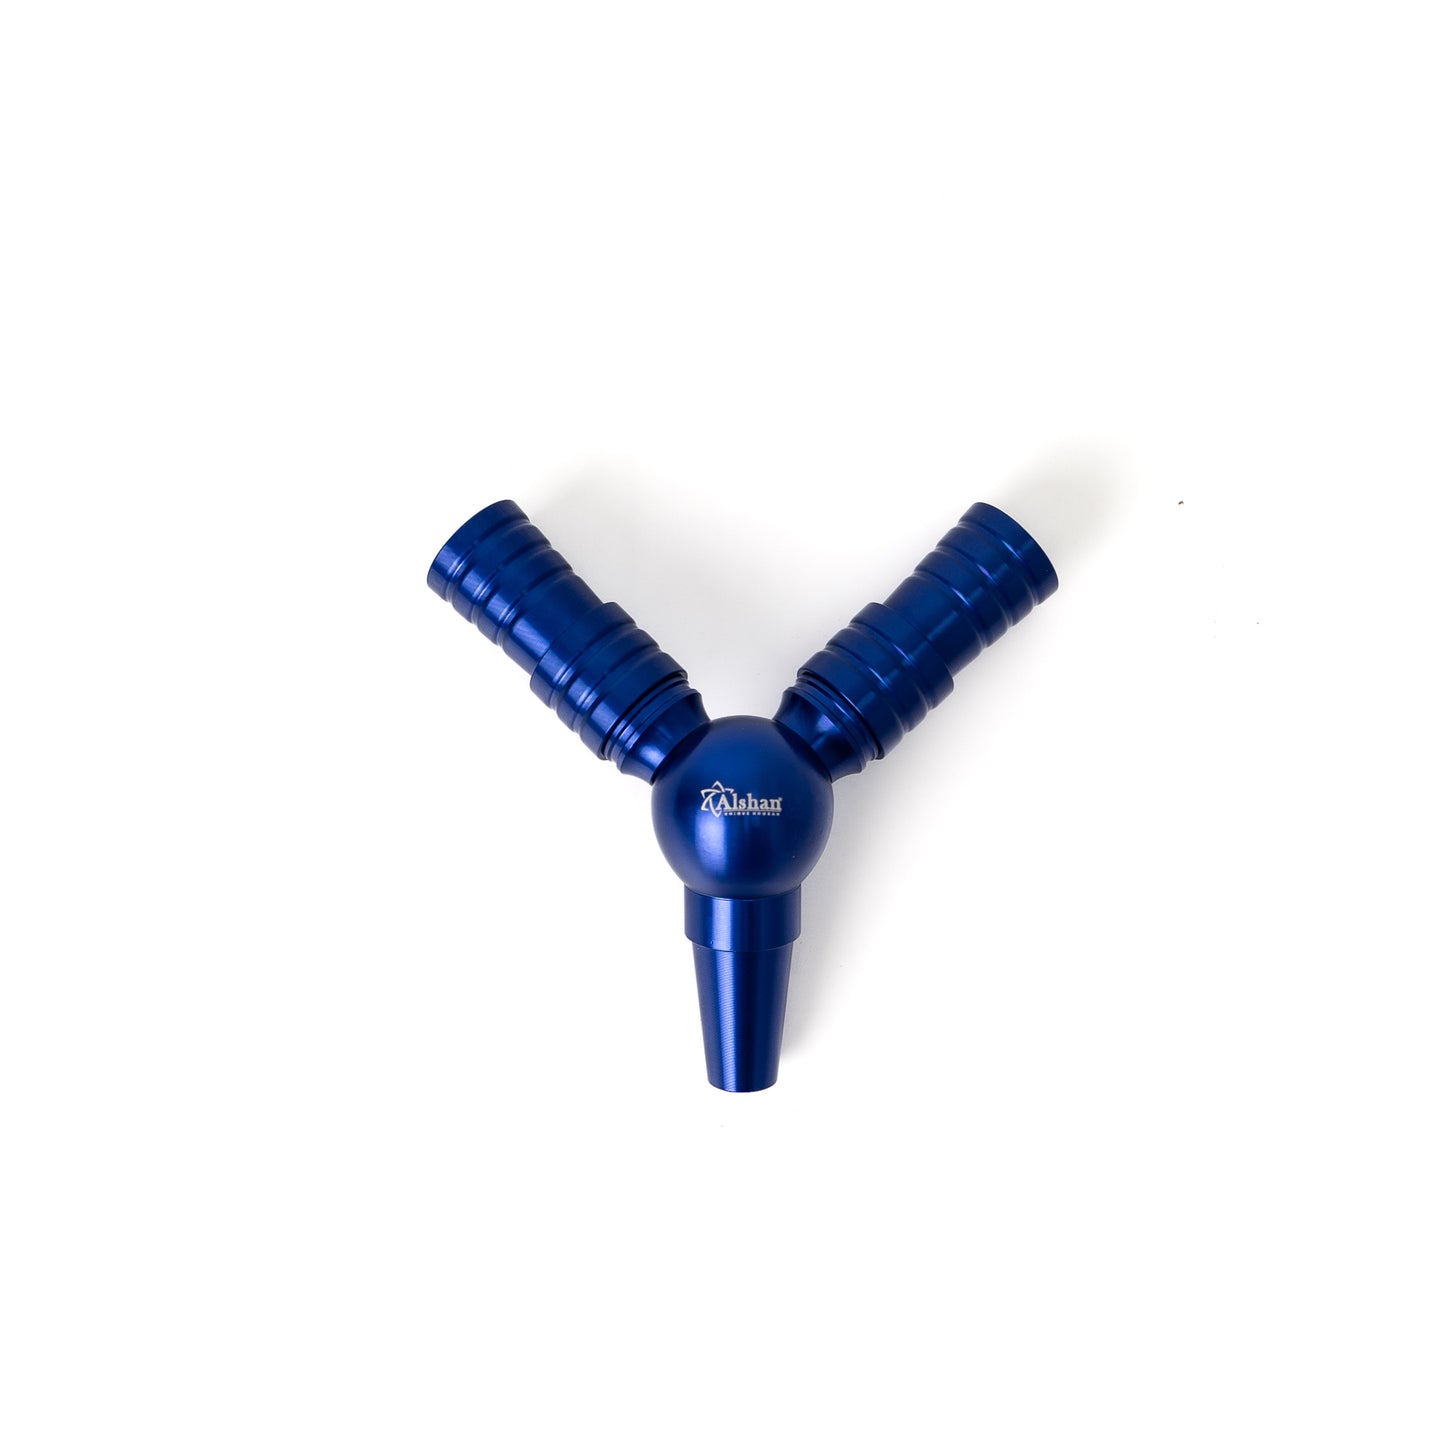 Dual Pipe Extension (Connector) for Hookah Pipe - Blue